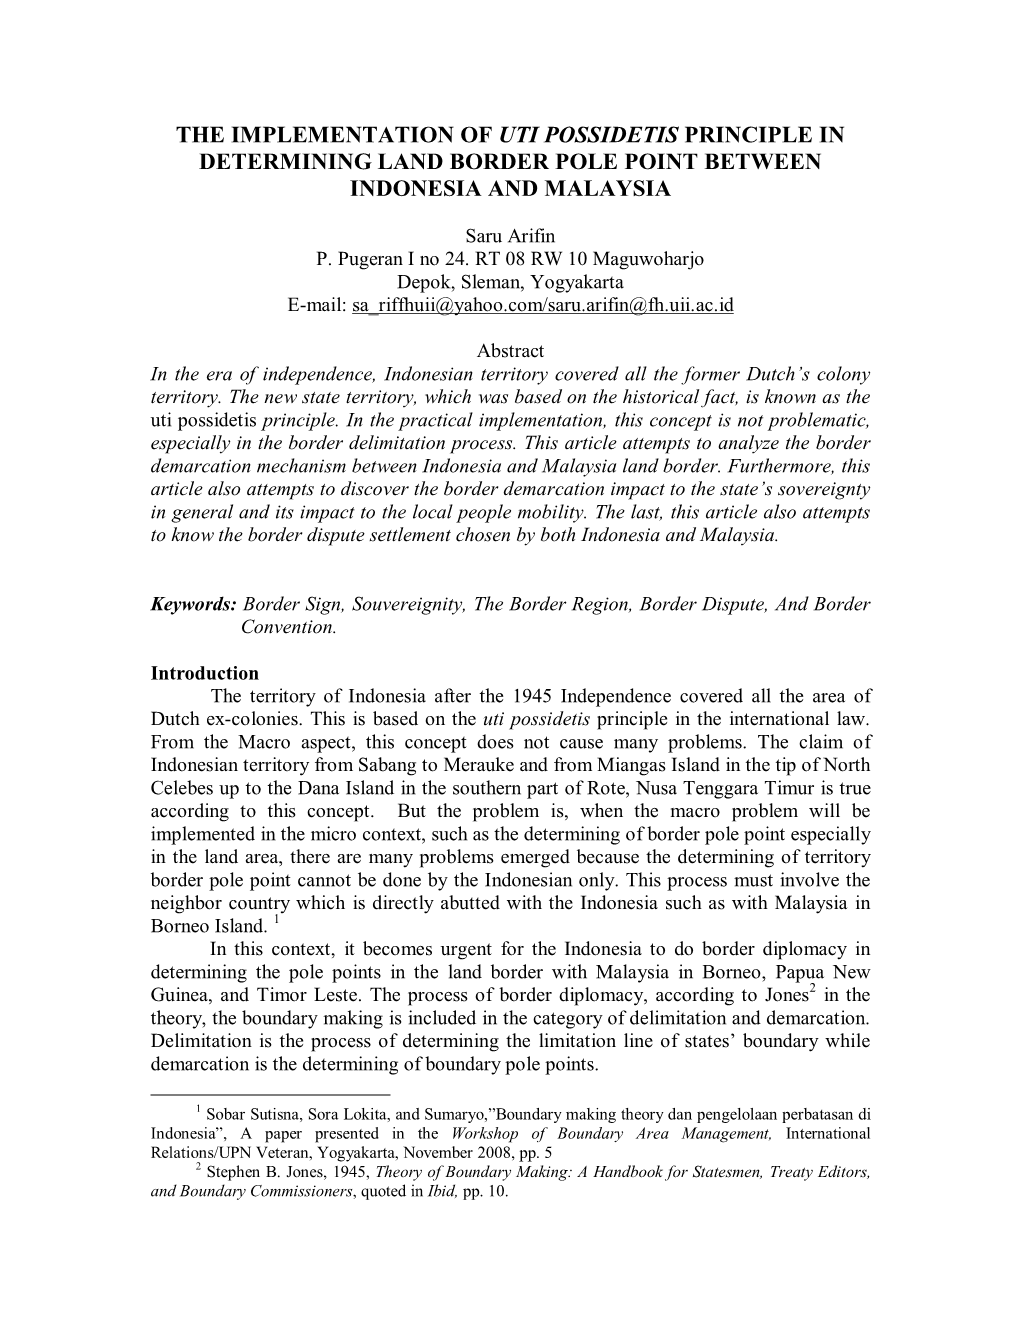 The Implementation of Uti Possidetis Principle in Determining Land Border Pole Point Between Indonesia and Malaysia